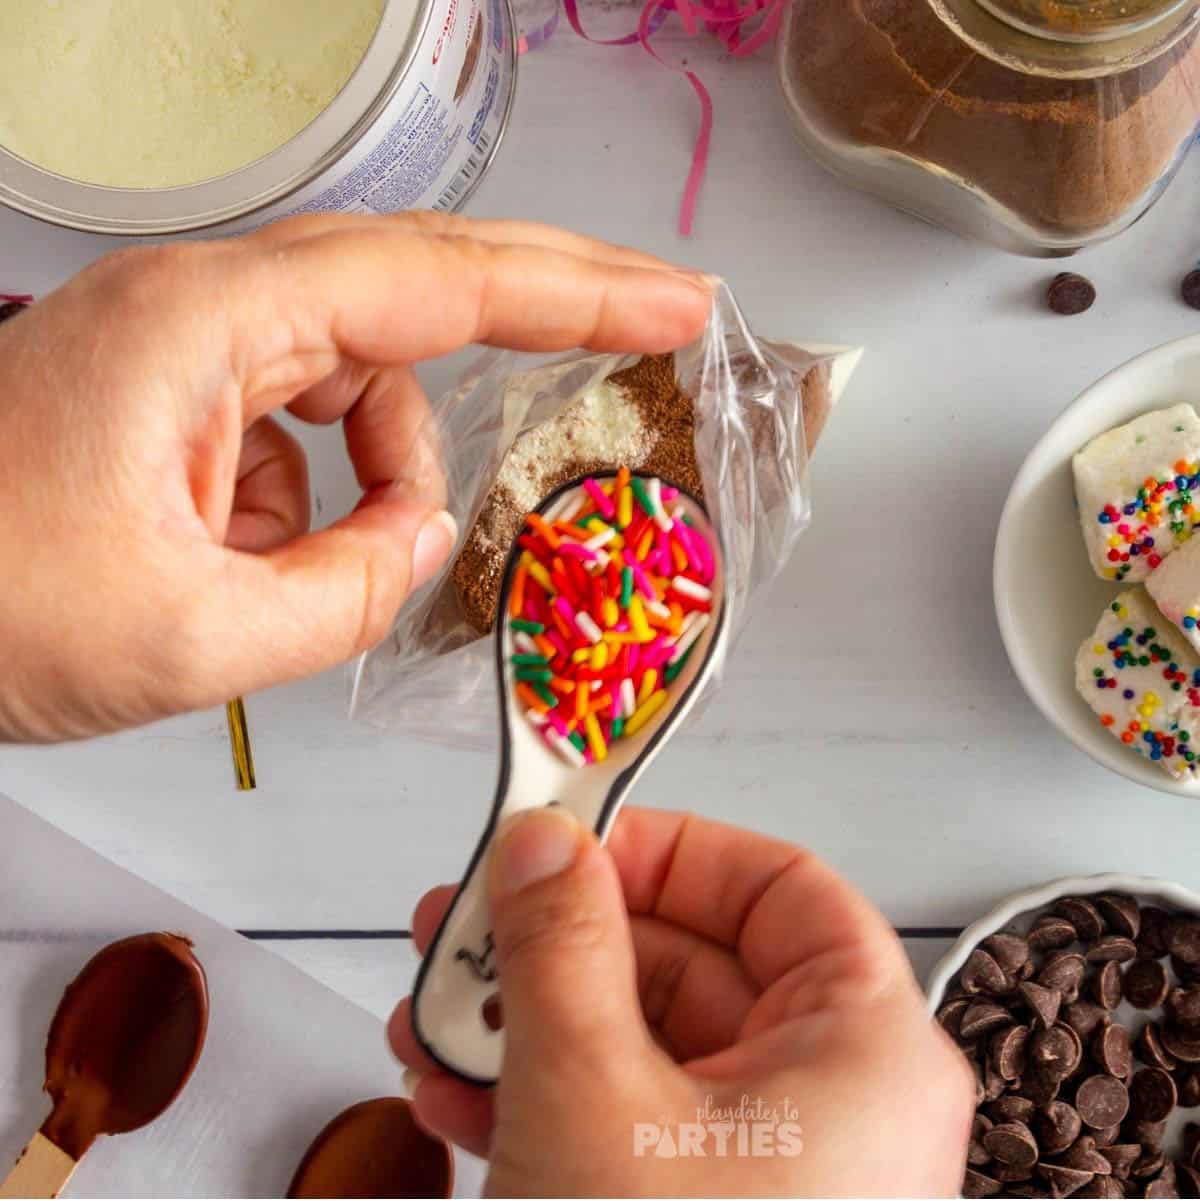 Pouring rainbow sprinkles into a hot chocolate favor bag.